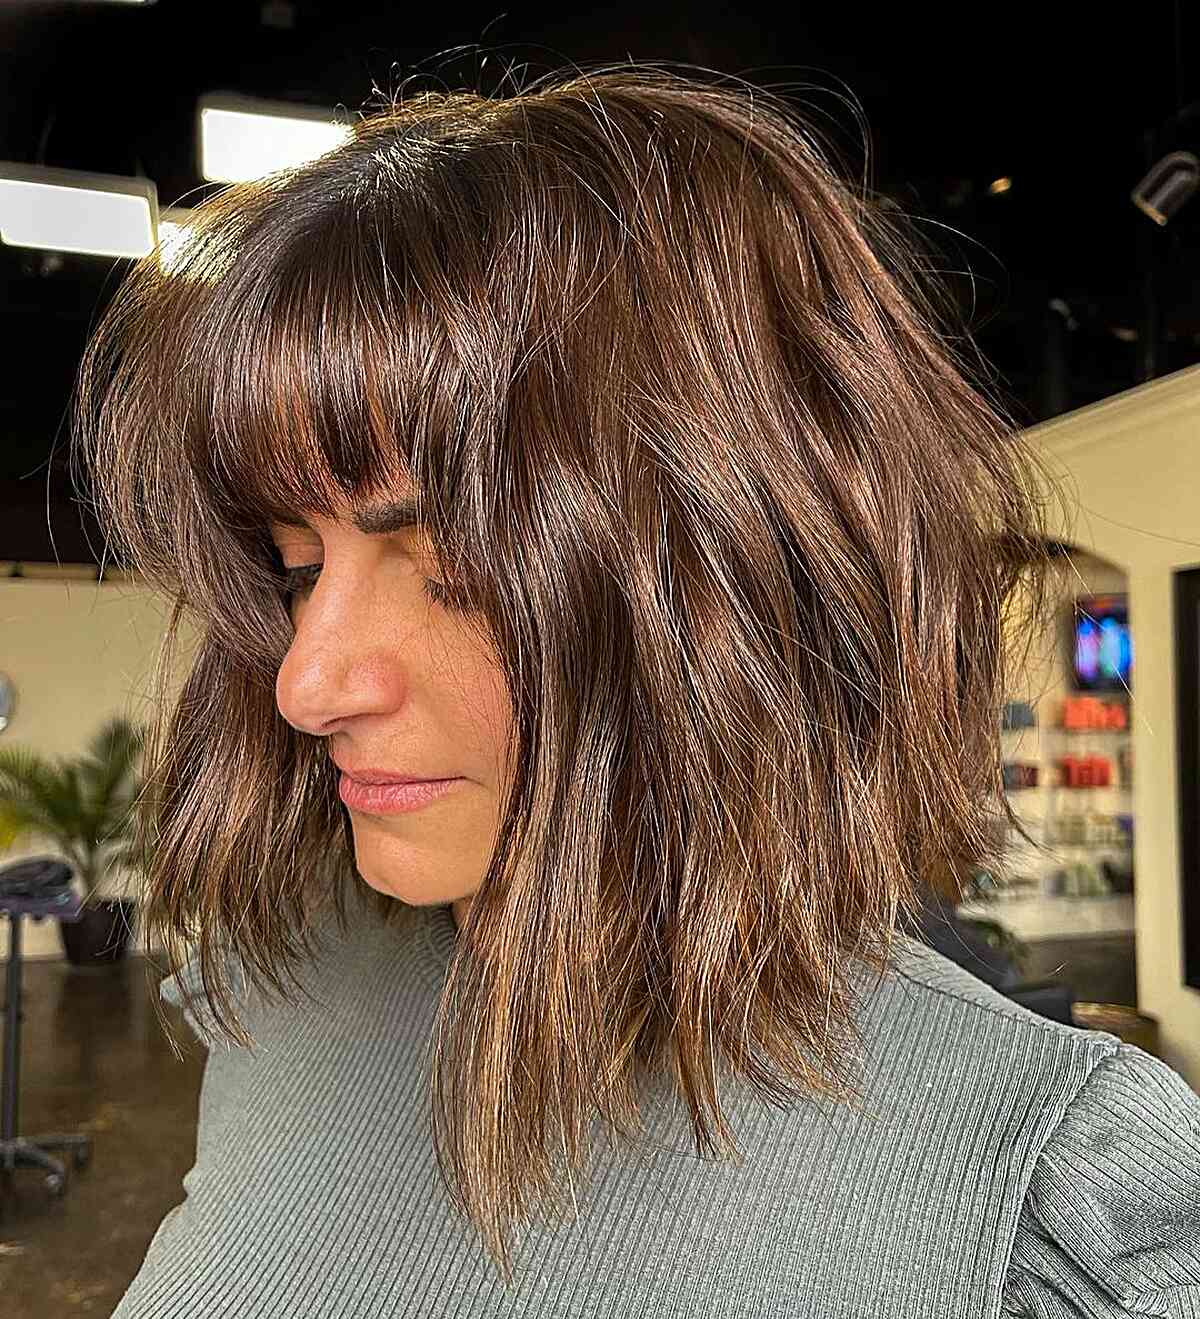 Face-Framing Tousled Textured Long Bob with Straight Bangs and Textured Ends